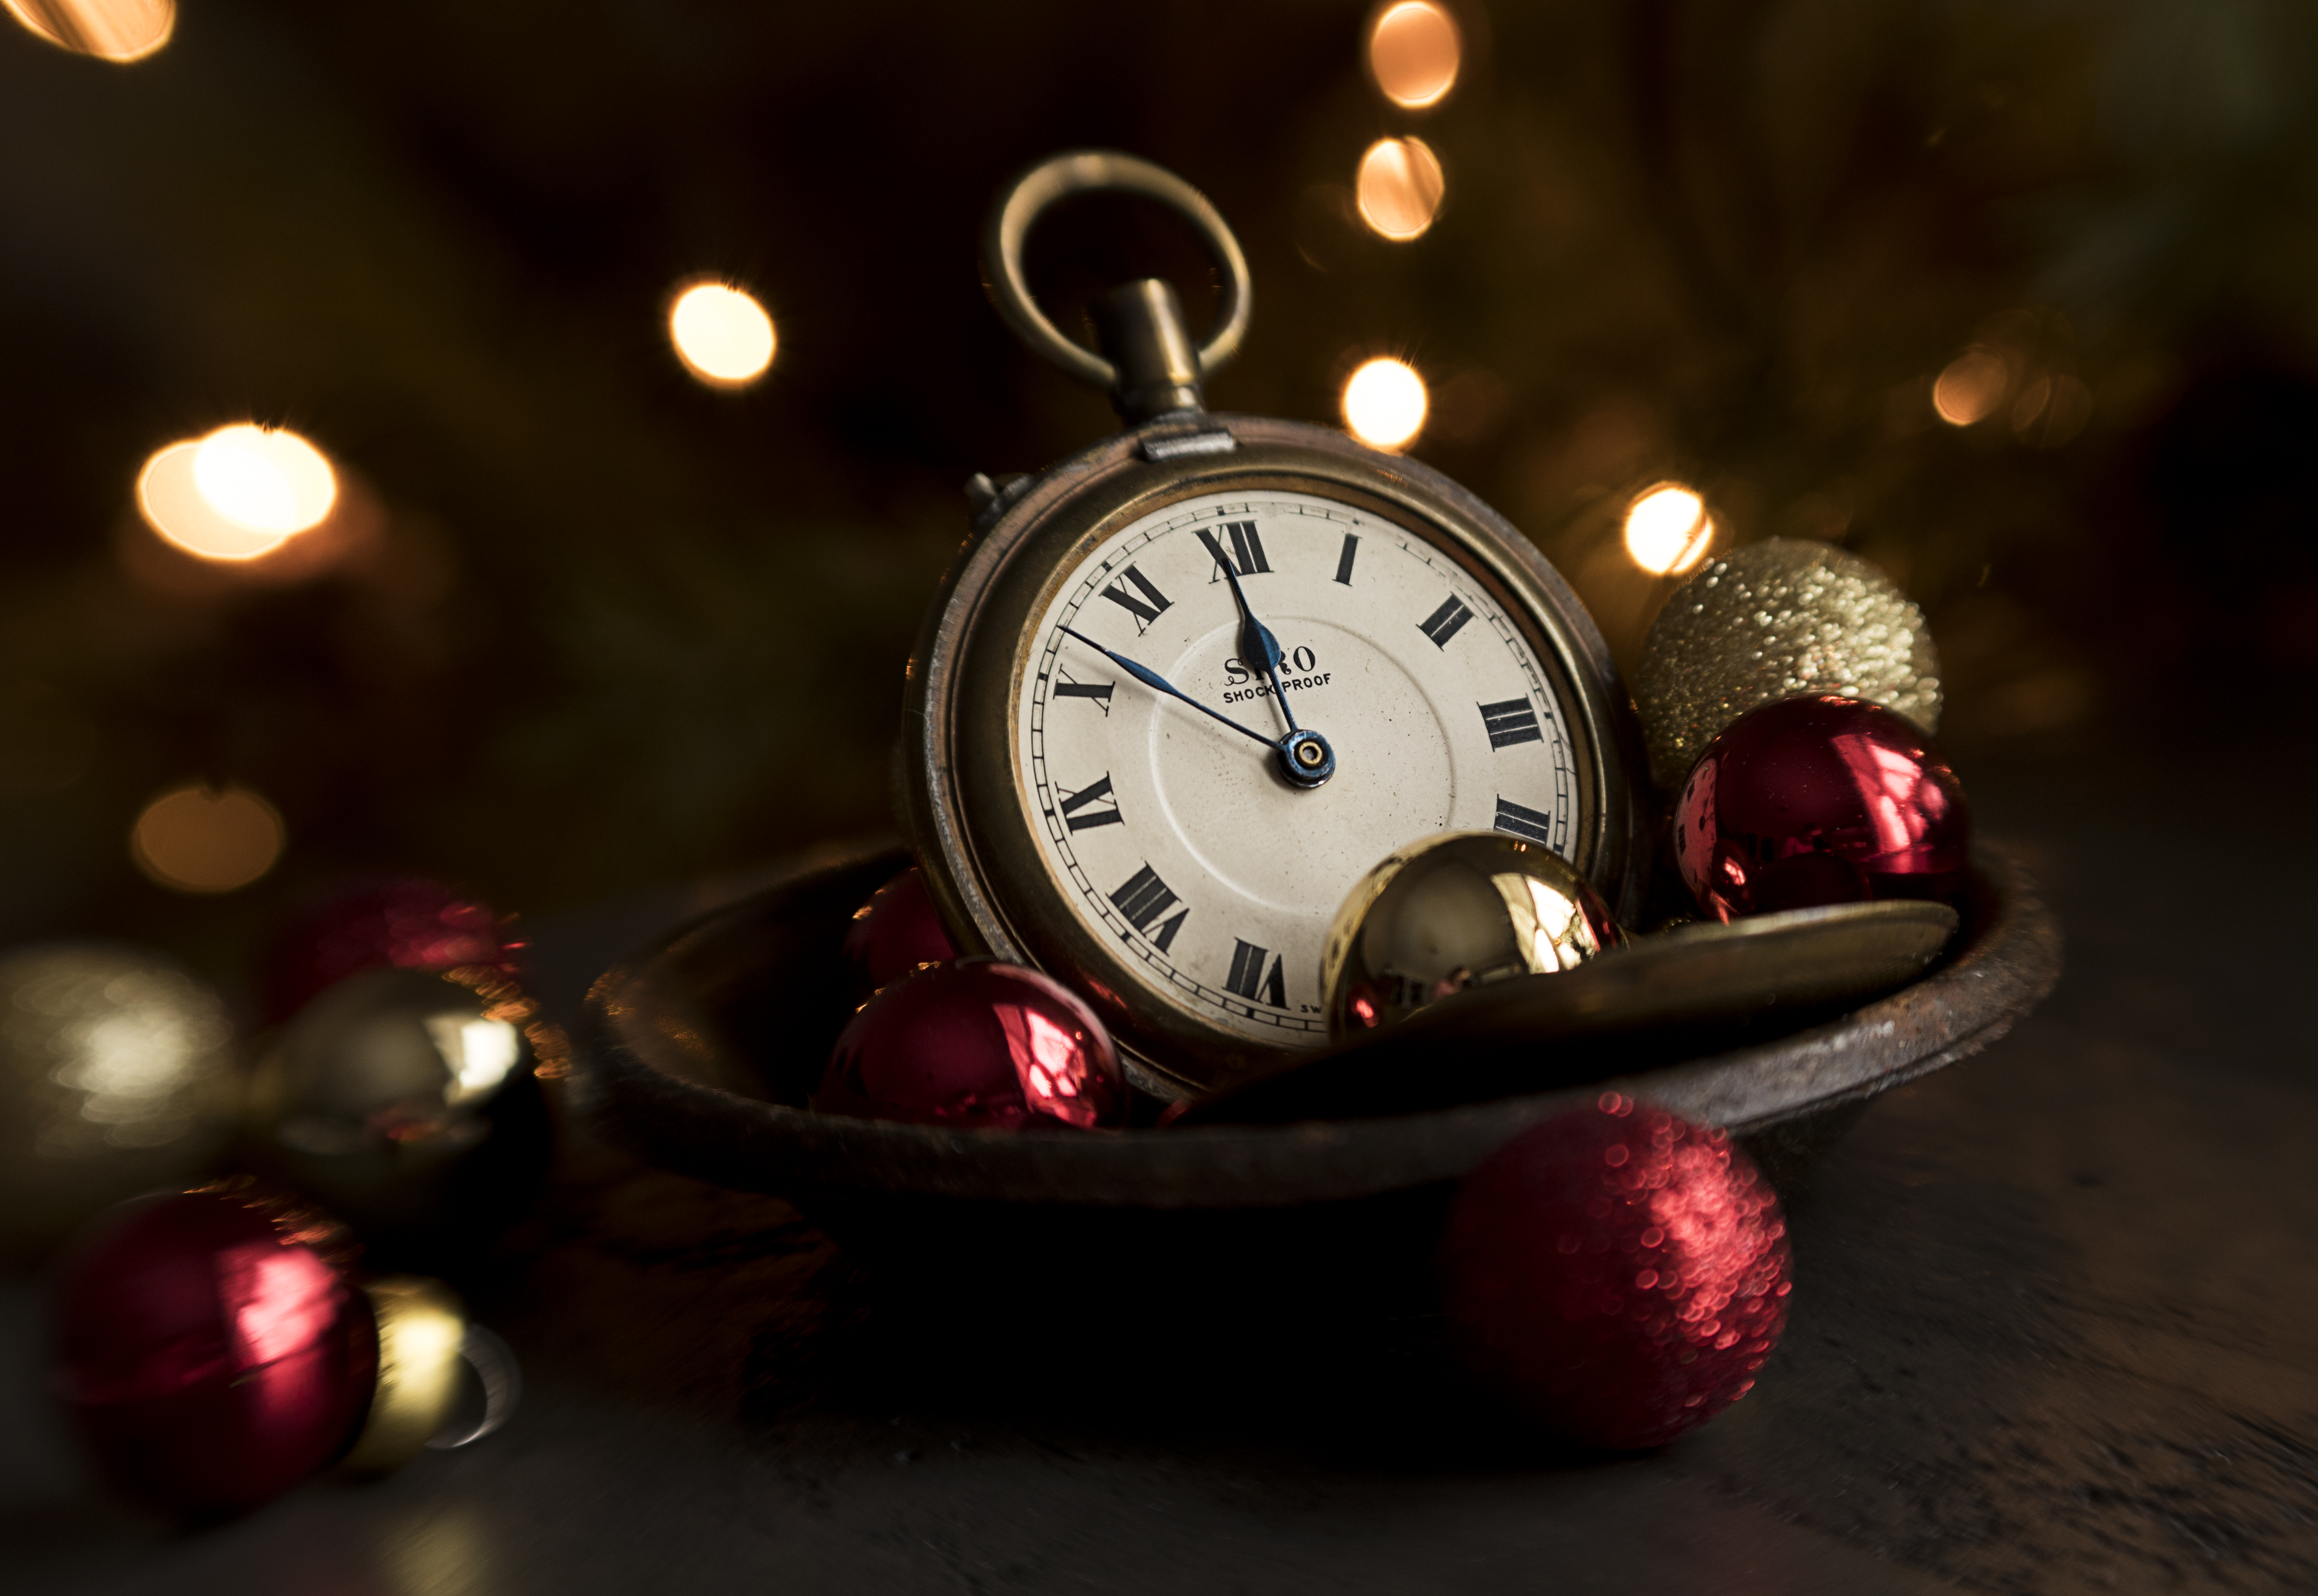 vintage, holidays, clock, new year, christmas, decorations, balls lock screen backgrounds